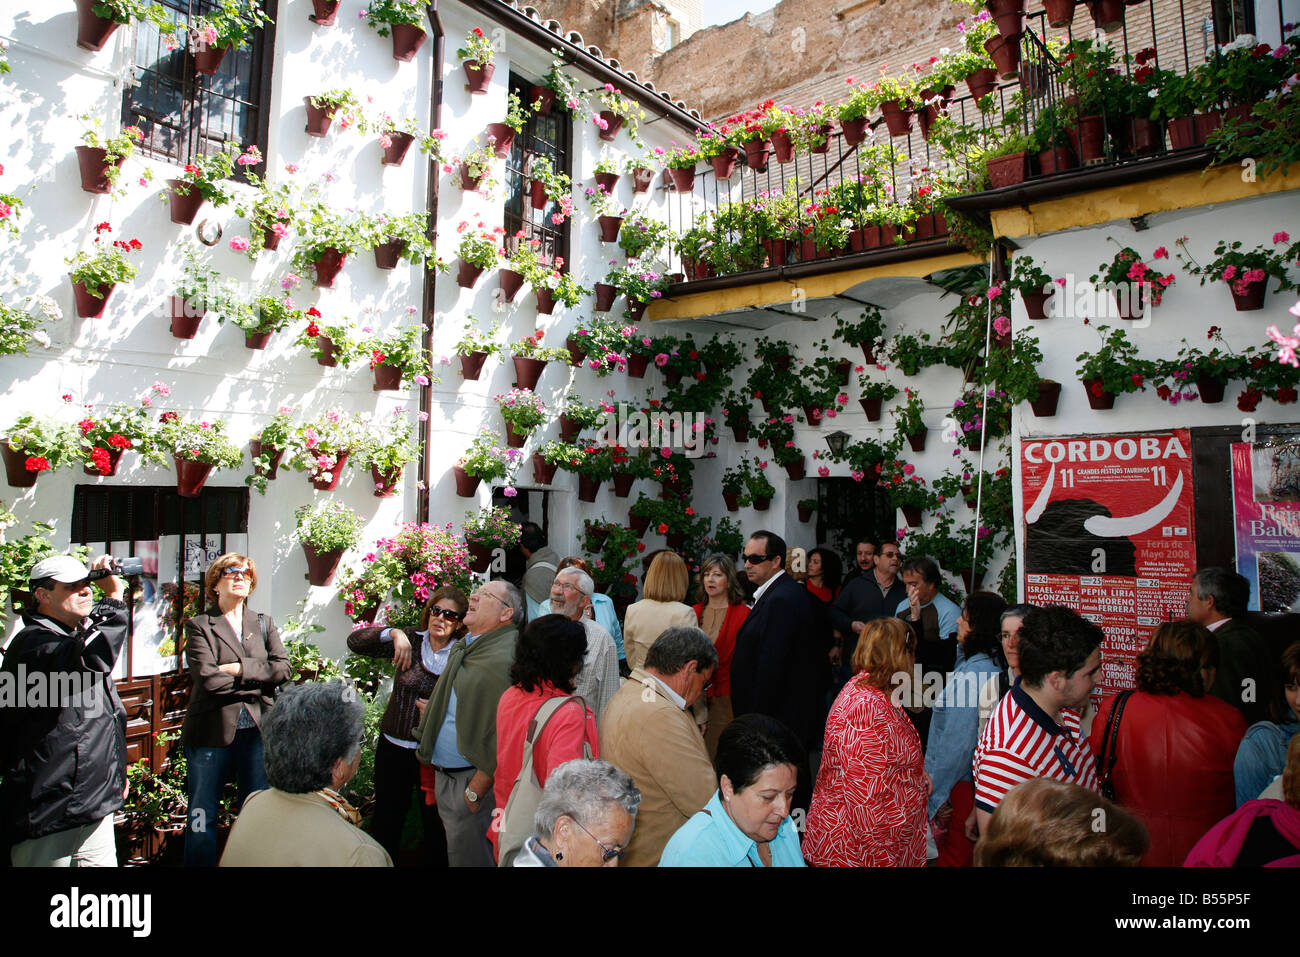 A large crowd of people inside a courtyard house as part of Los Patios, Festival of Patios in Cordoba, Spain Stock Photo